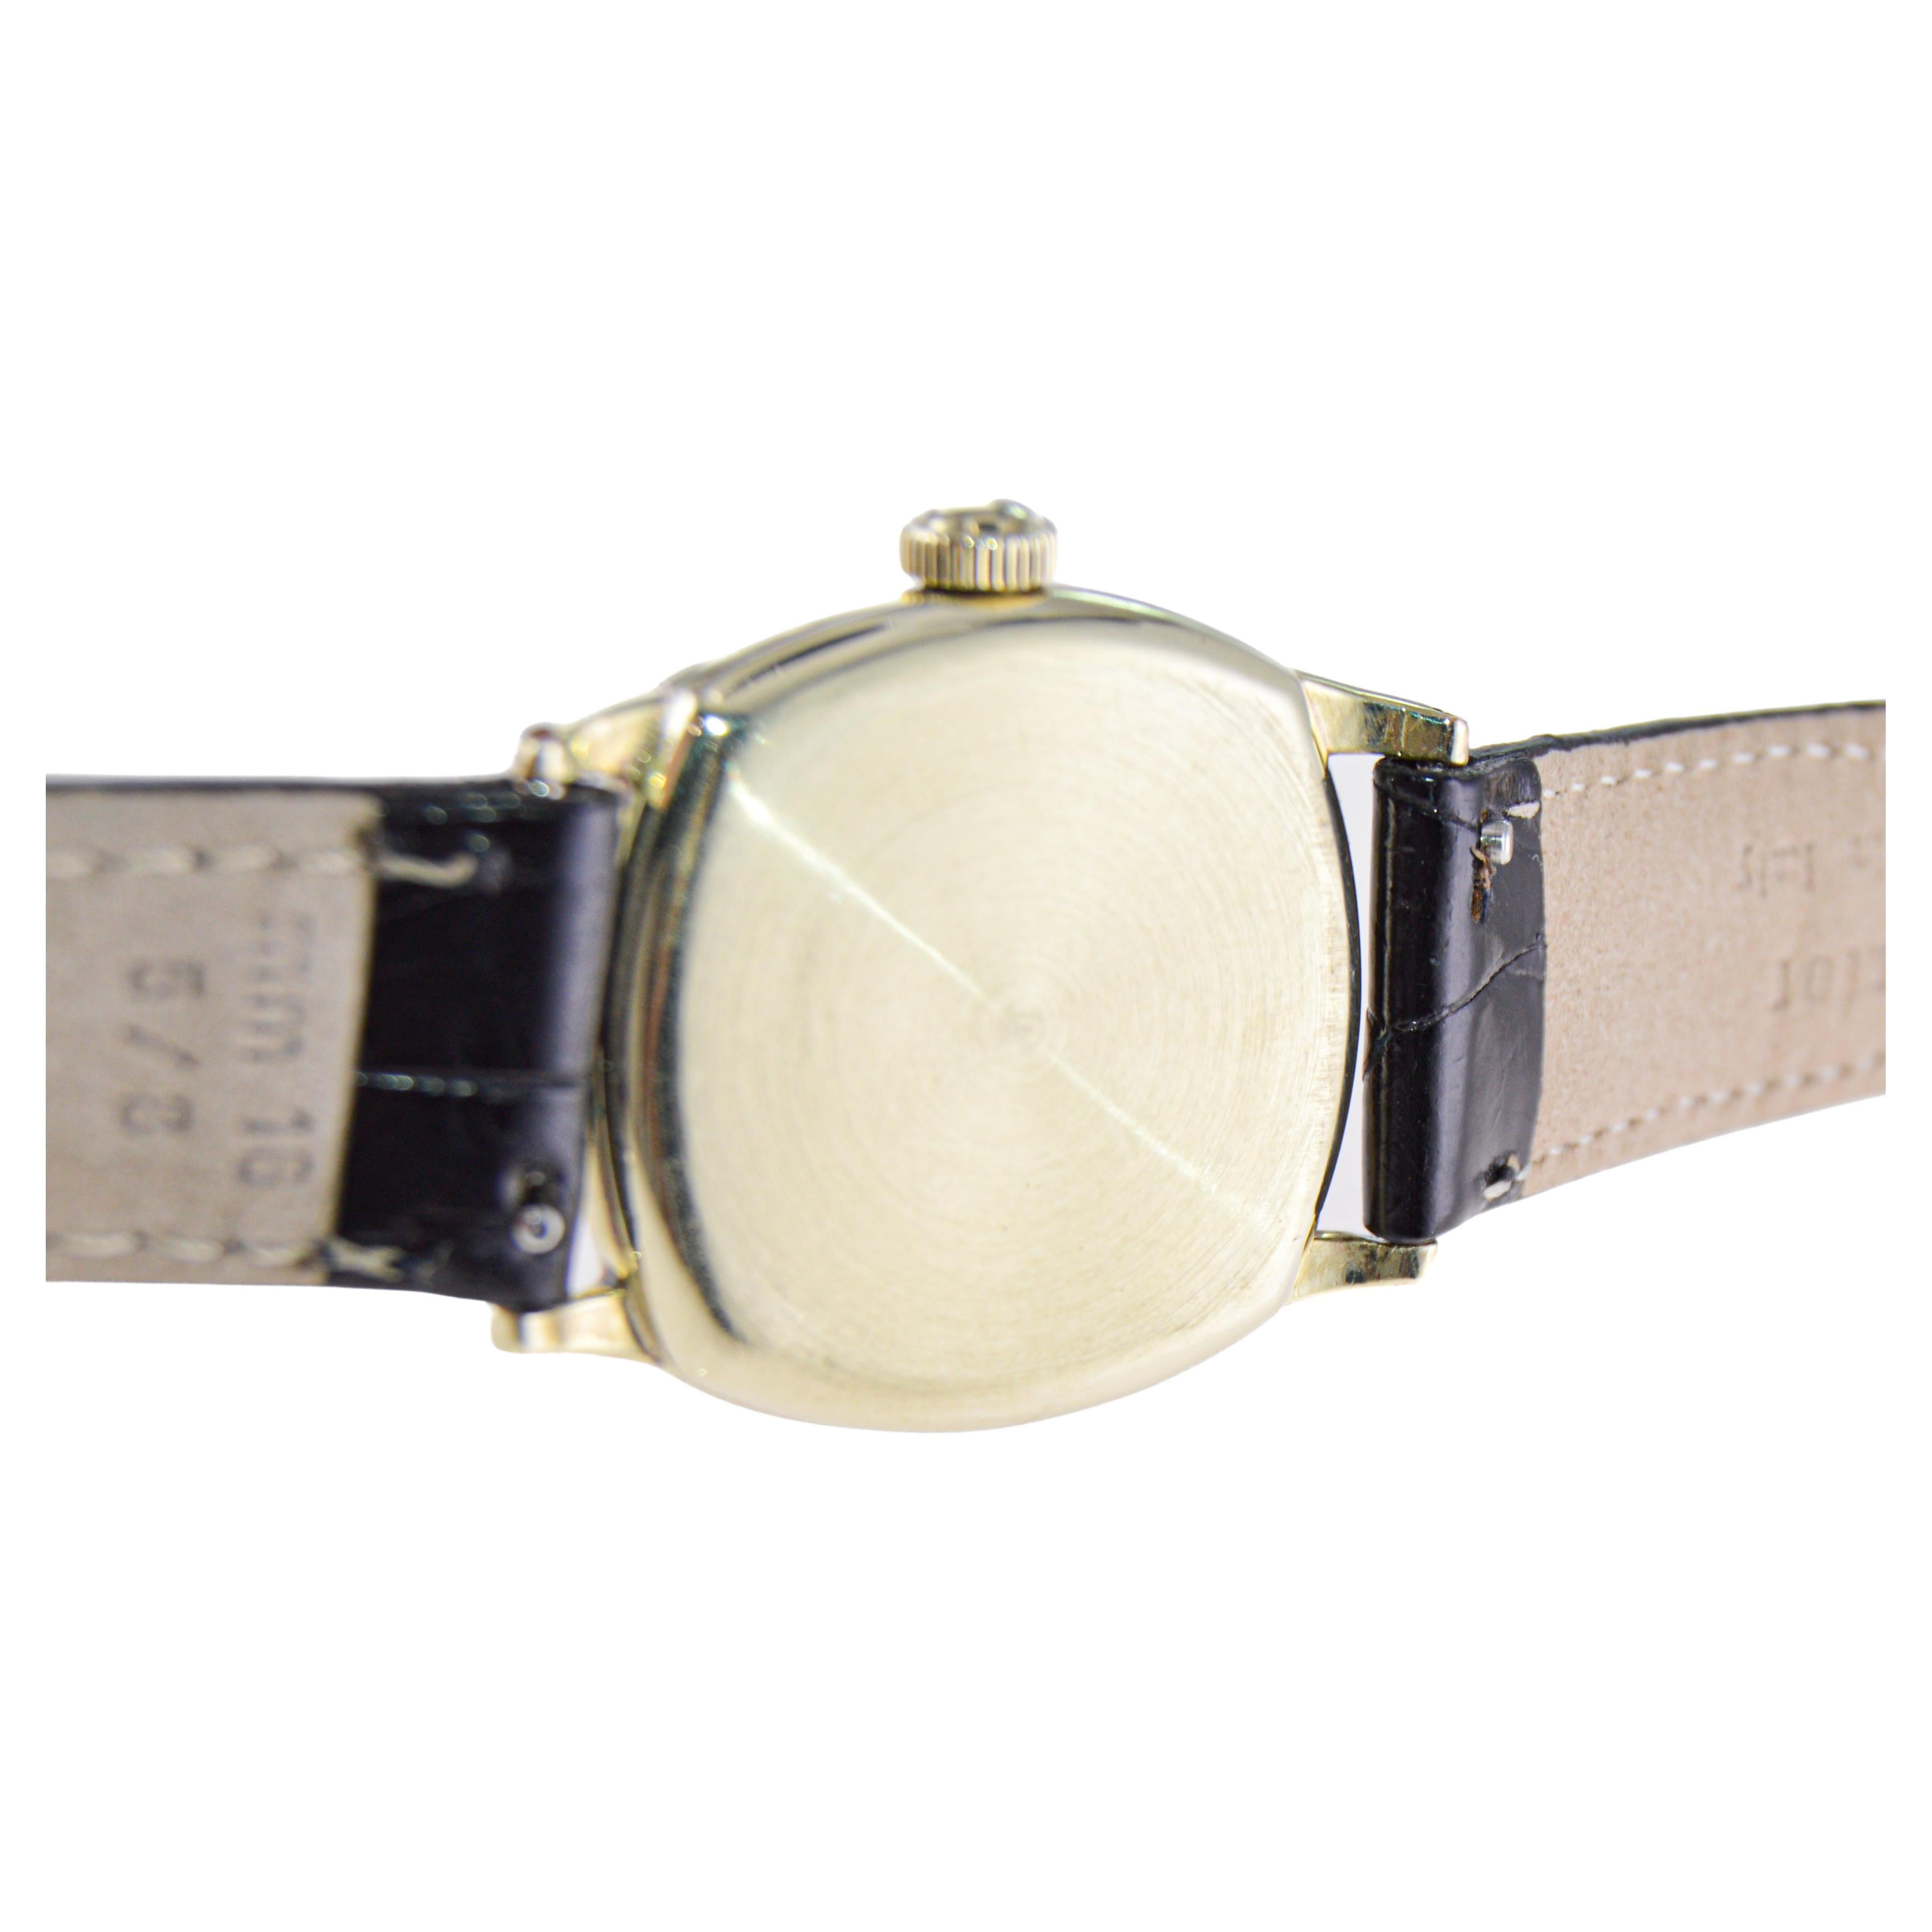 Waltham Yellow Gold Filled Art Deco Cushion Shaped Watch from 1926 For Sale 5